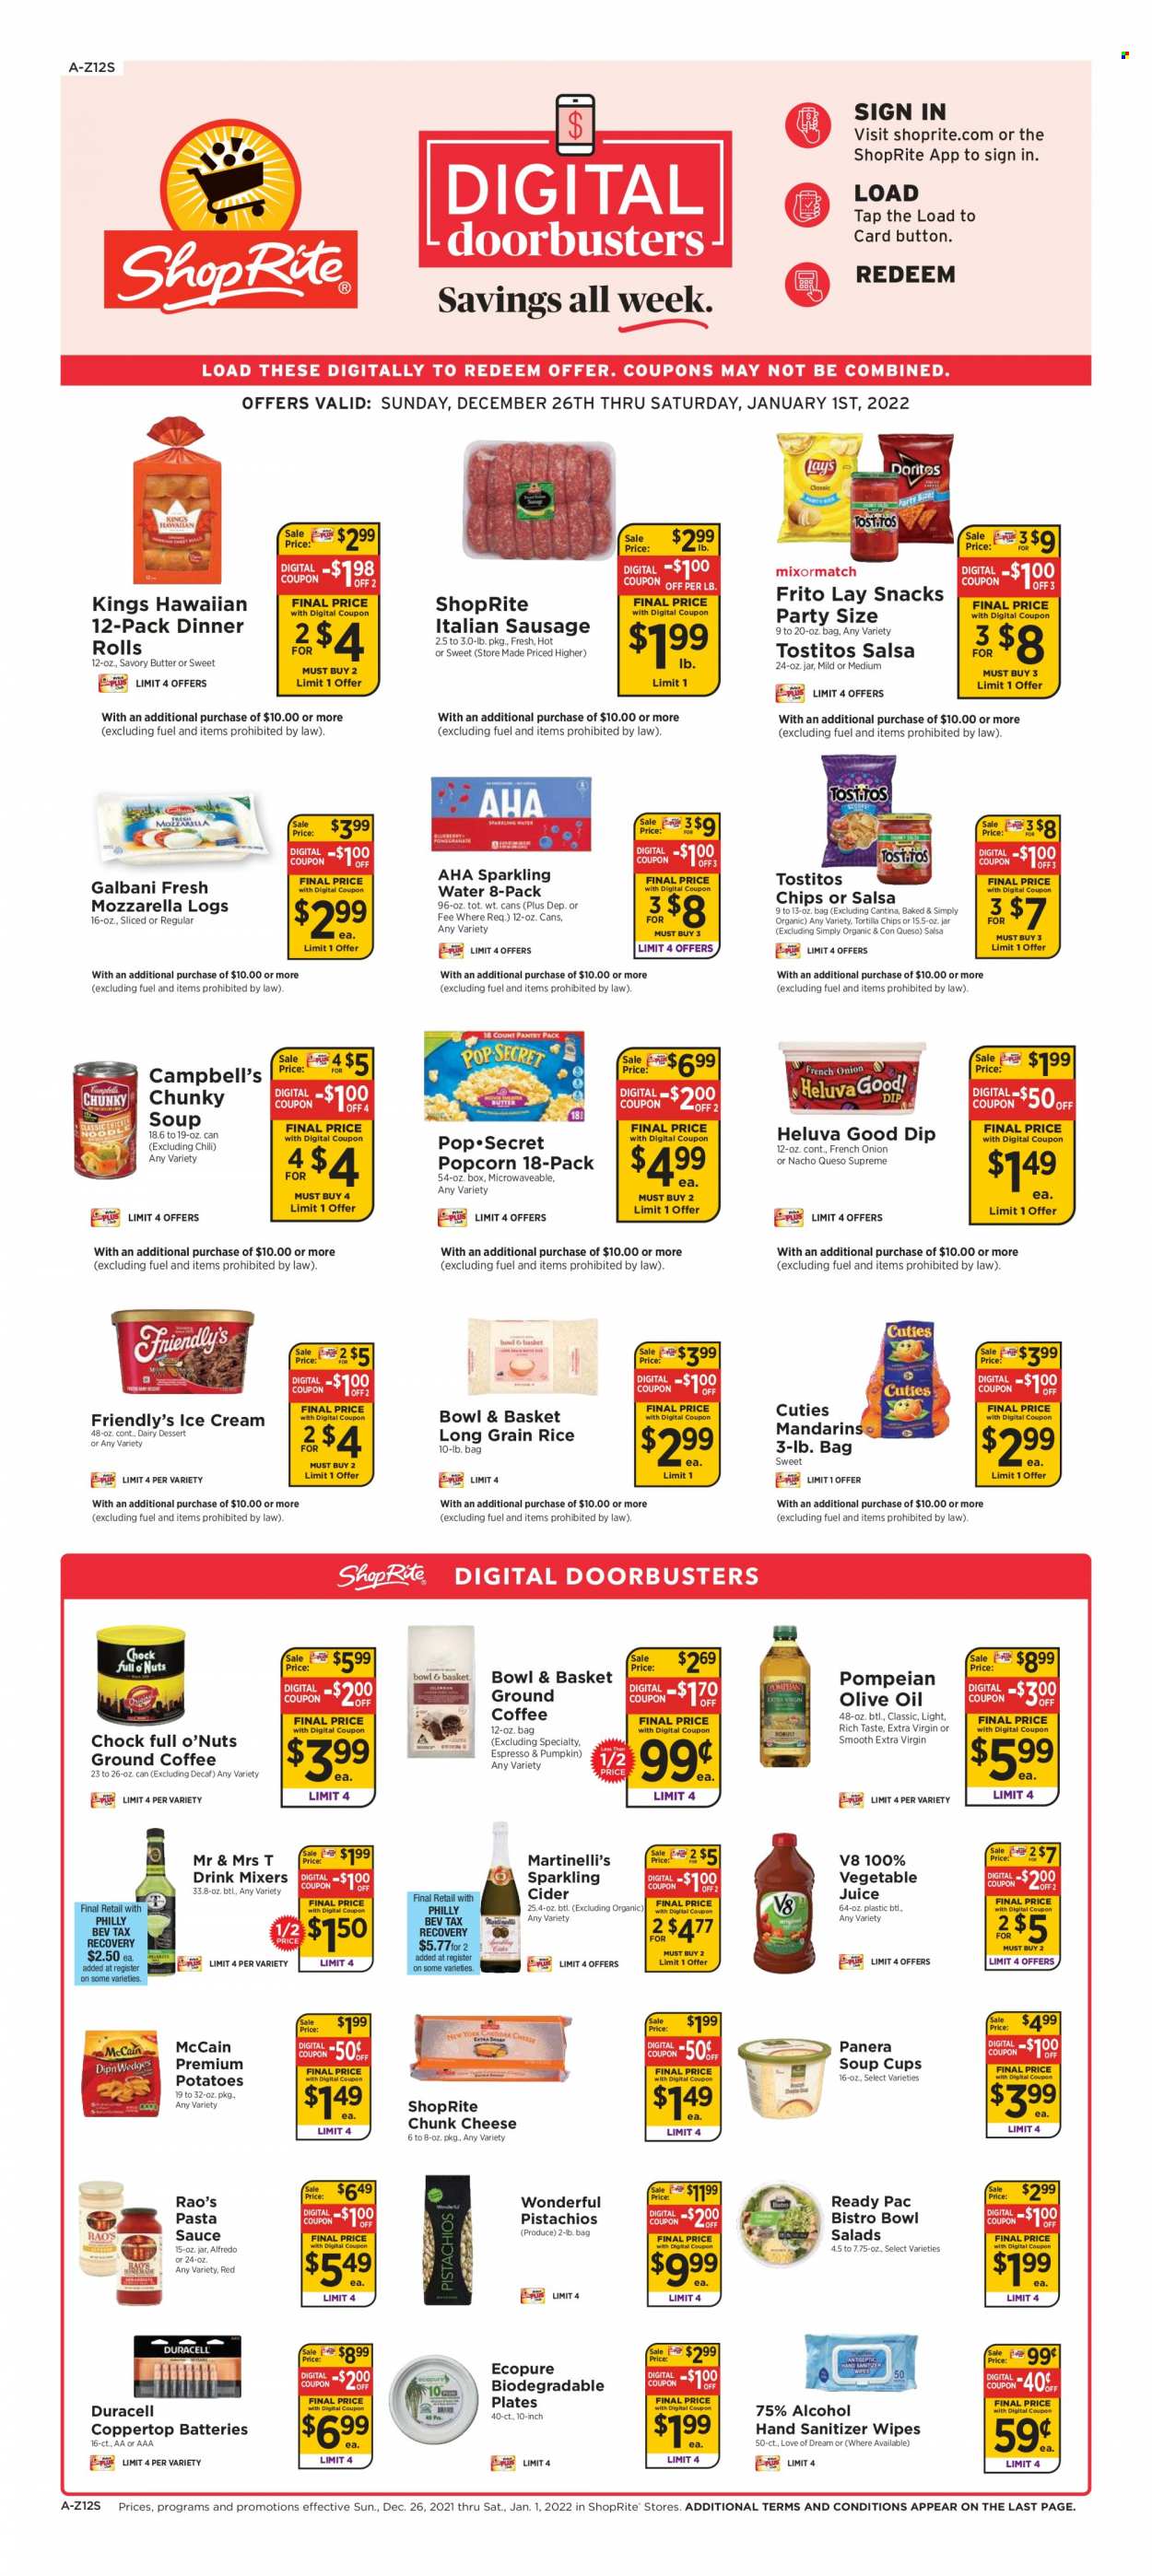 thumbnail - ShopRite Flyer - 12/26/2021 - 01/01/2022 - Sales products - dinner rolls, Bowl & Basket, potatoes, mandarines, Campbell's, pasta sauce, soup, sauce, Ready Pac, sausage, italian sausage, mozzarella, cheese, Galbani, chunk cheese, butter, dip, ice cream, Friendly's Ice Cream, McCain, snack, tortilla chips, chips, popcorn, Tostitos, rice, long grain rice, salsa, extra virgin olive oil, olive oil, oil, pistachios, juice, vegetable juice, sparkling water, sparkling cider, sparkling wine, cider, wipes, plate, cup, battery, Duracell. Page 1.